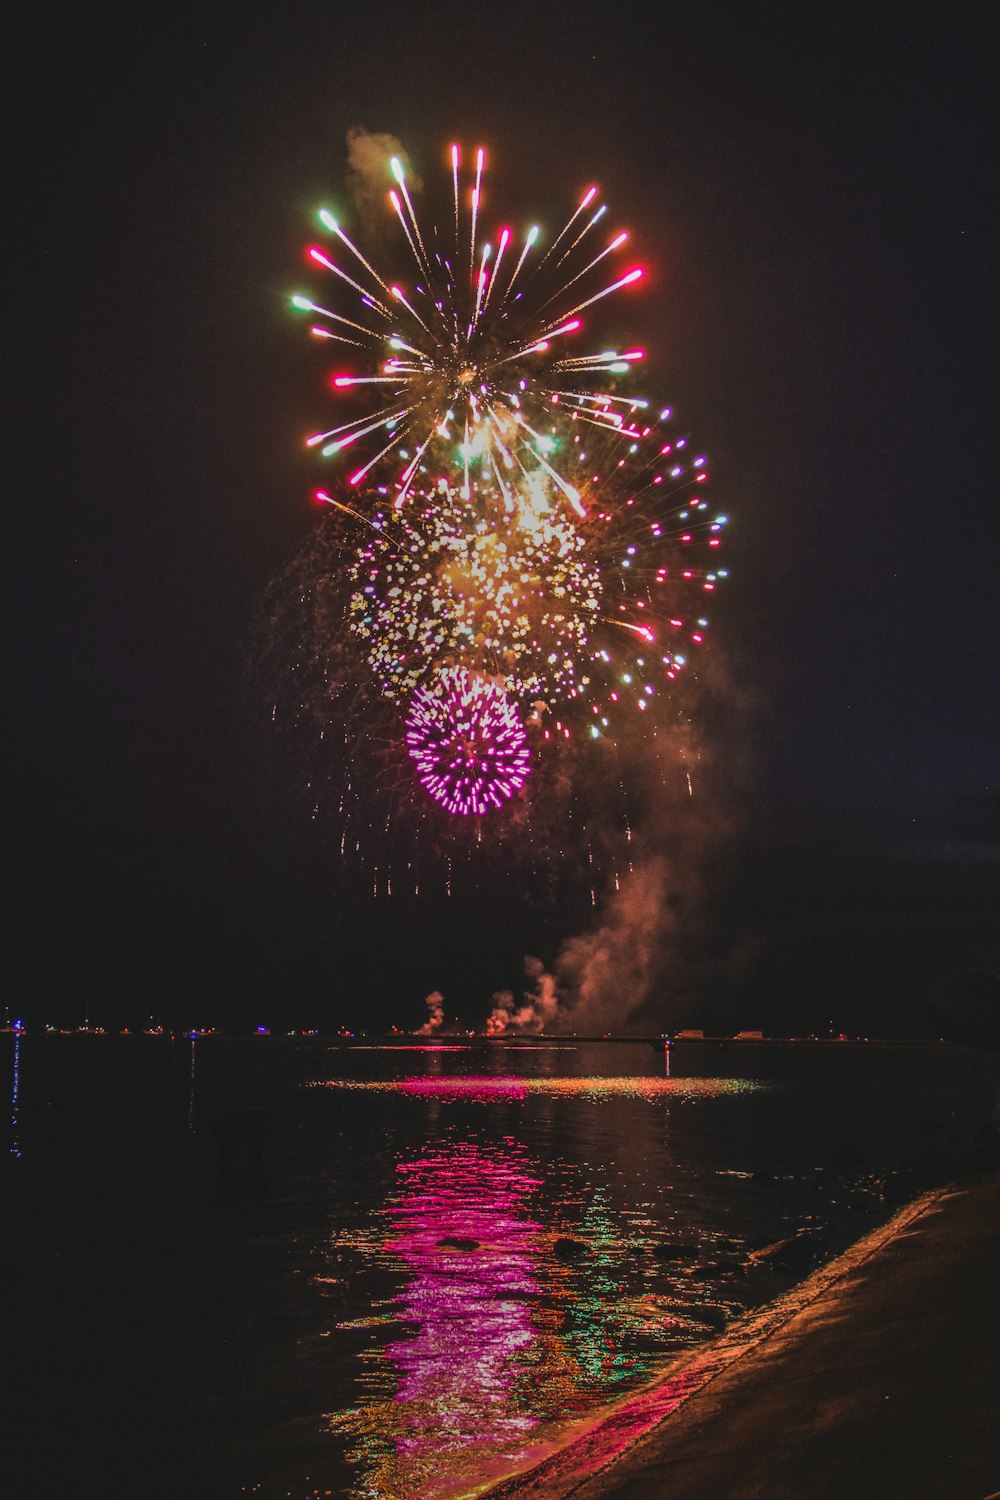 a colorful fireworks display over a body of water